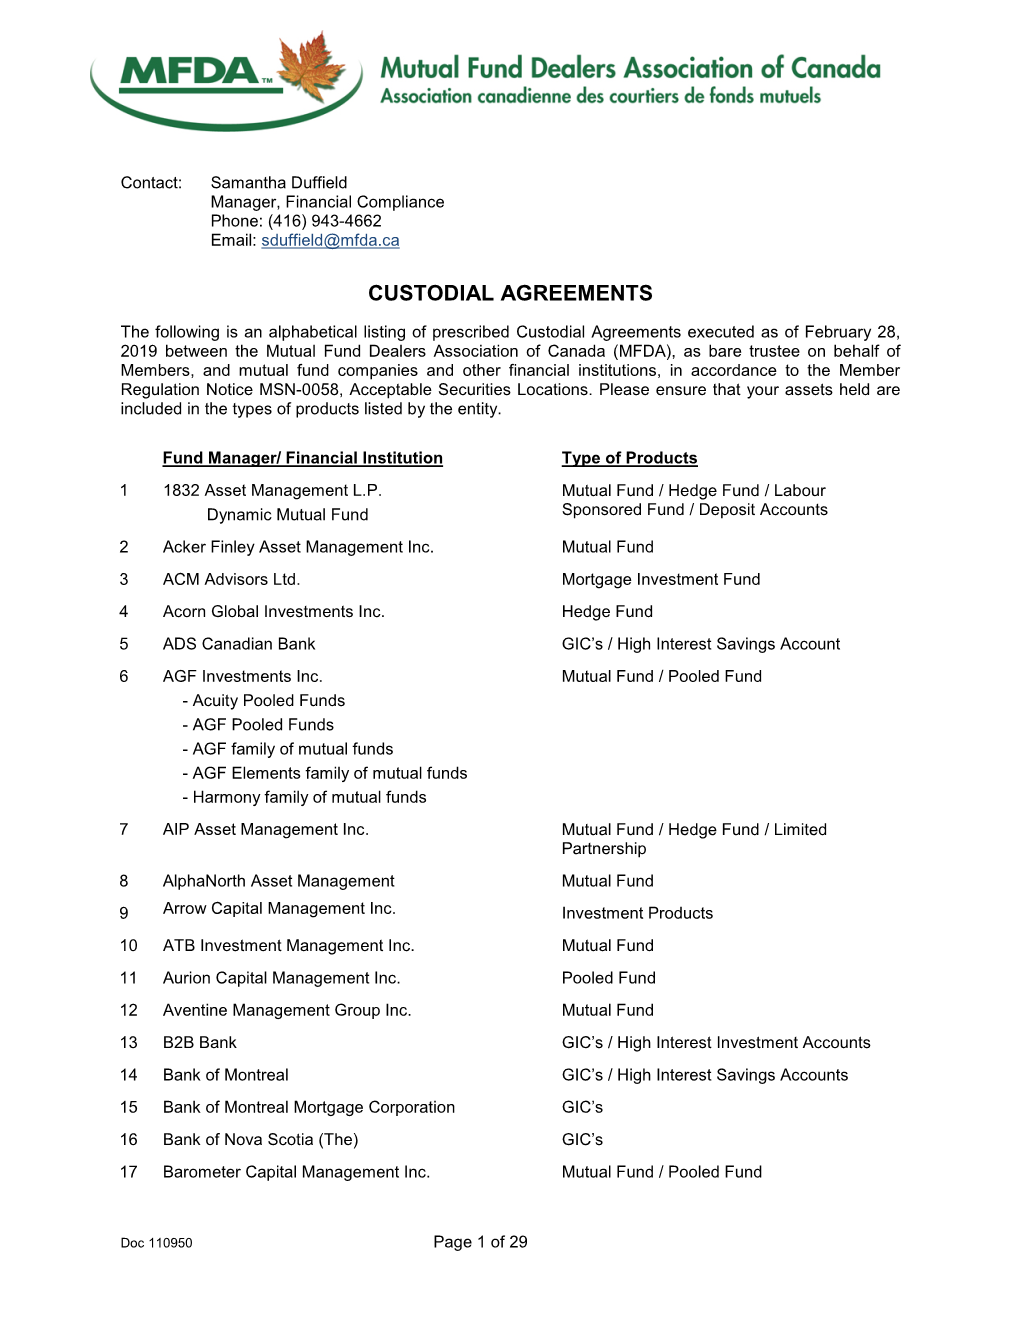 Custodial Agreements Listing As at February 28, 2019